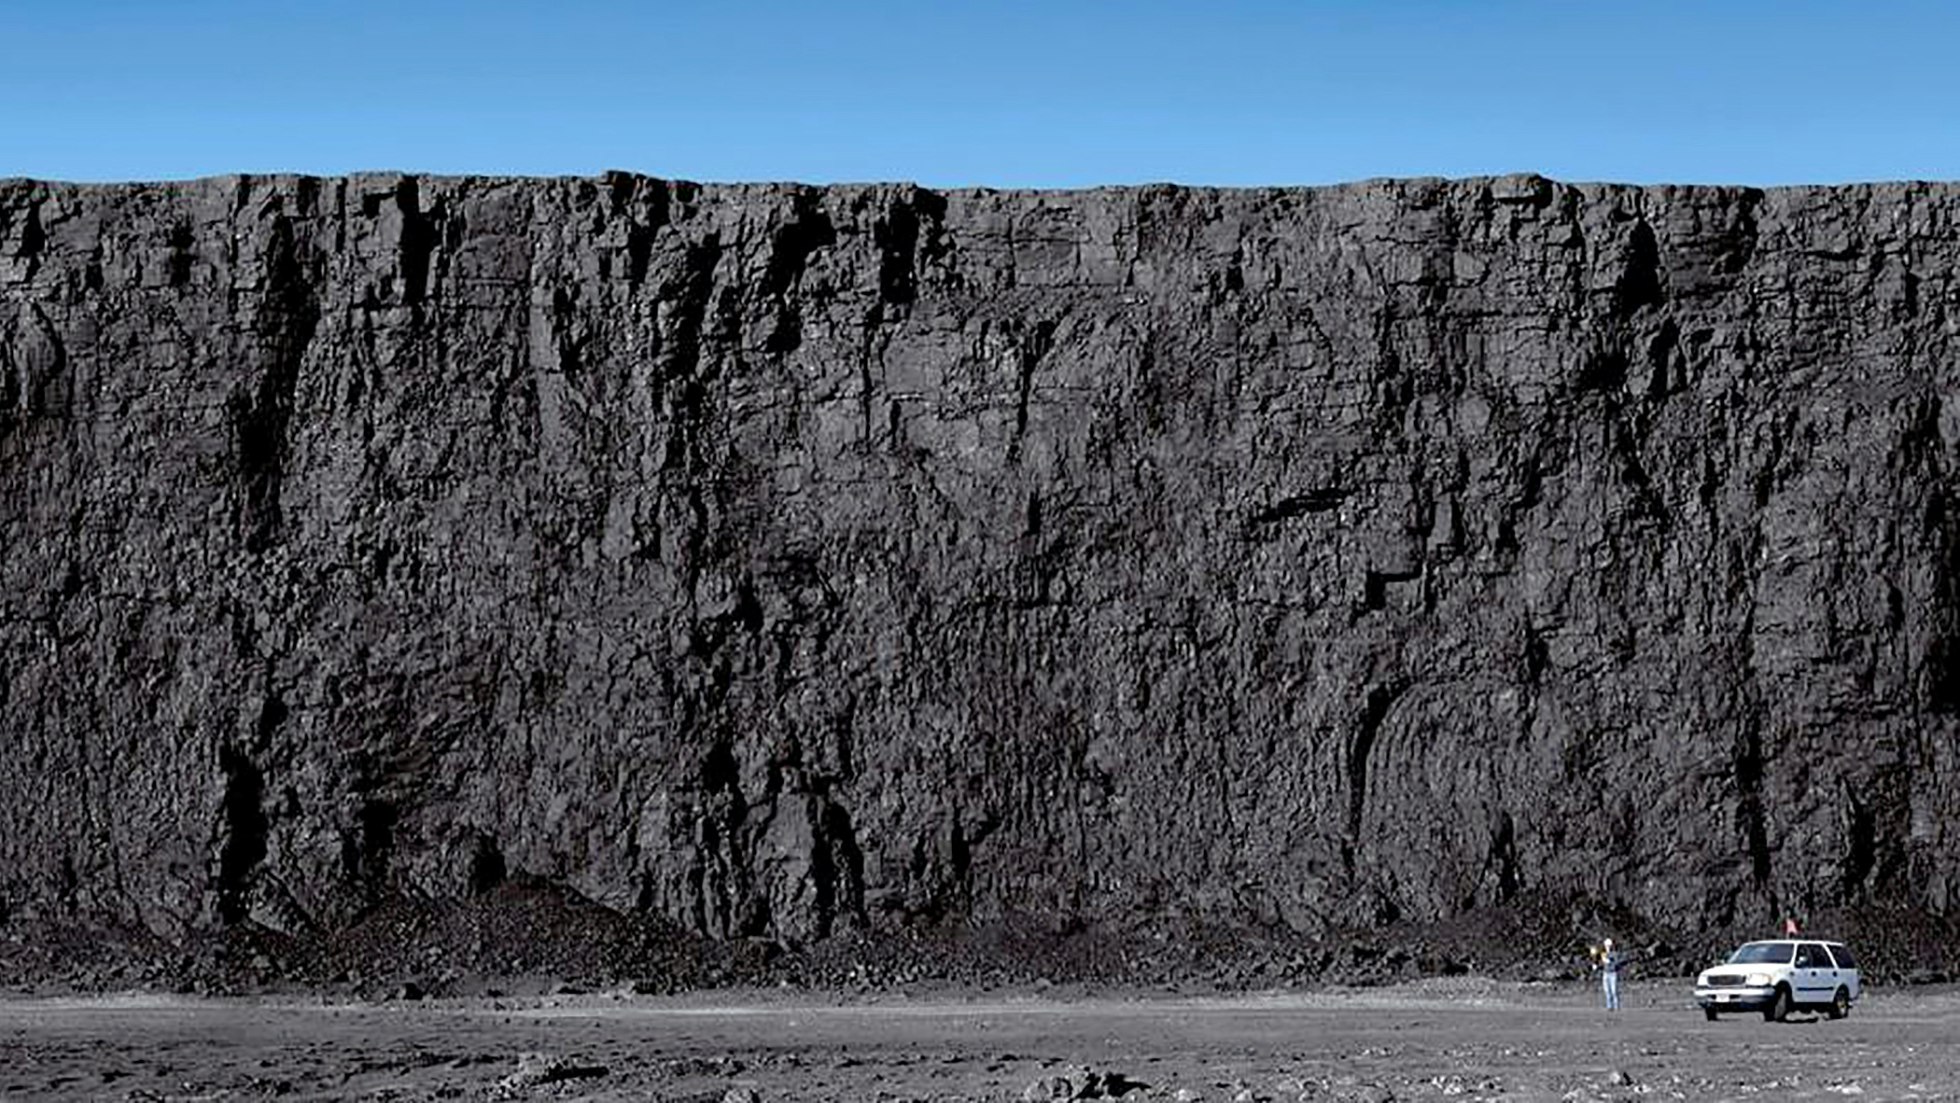 A man standing next to an SUV gives perspective to this huge exposed coal seam at a Powder River Basin mine.